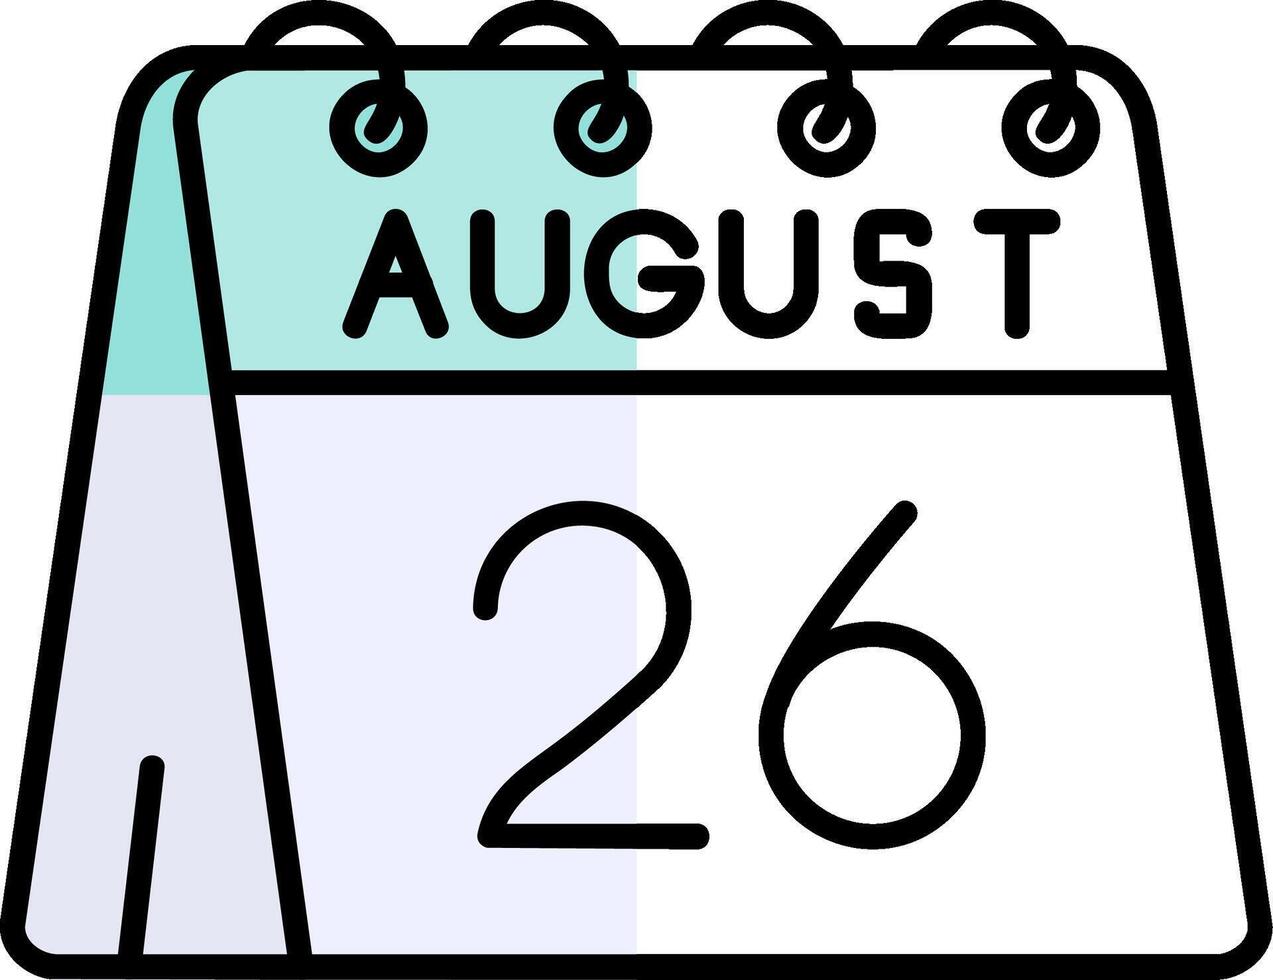 26th of August Filled Half Cut Icon vector